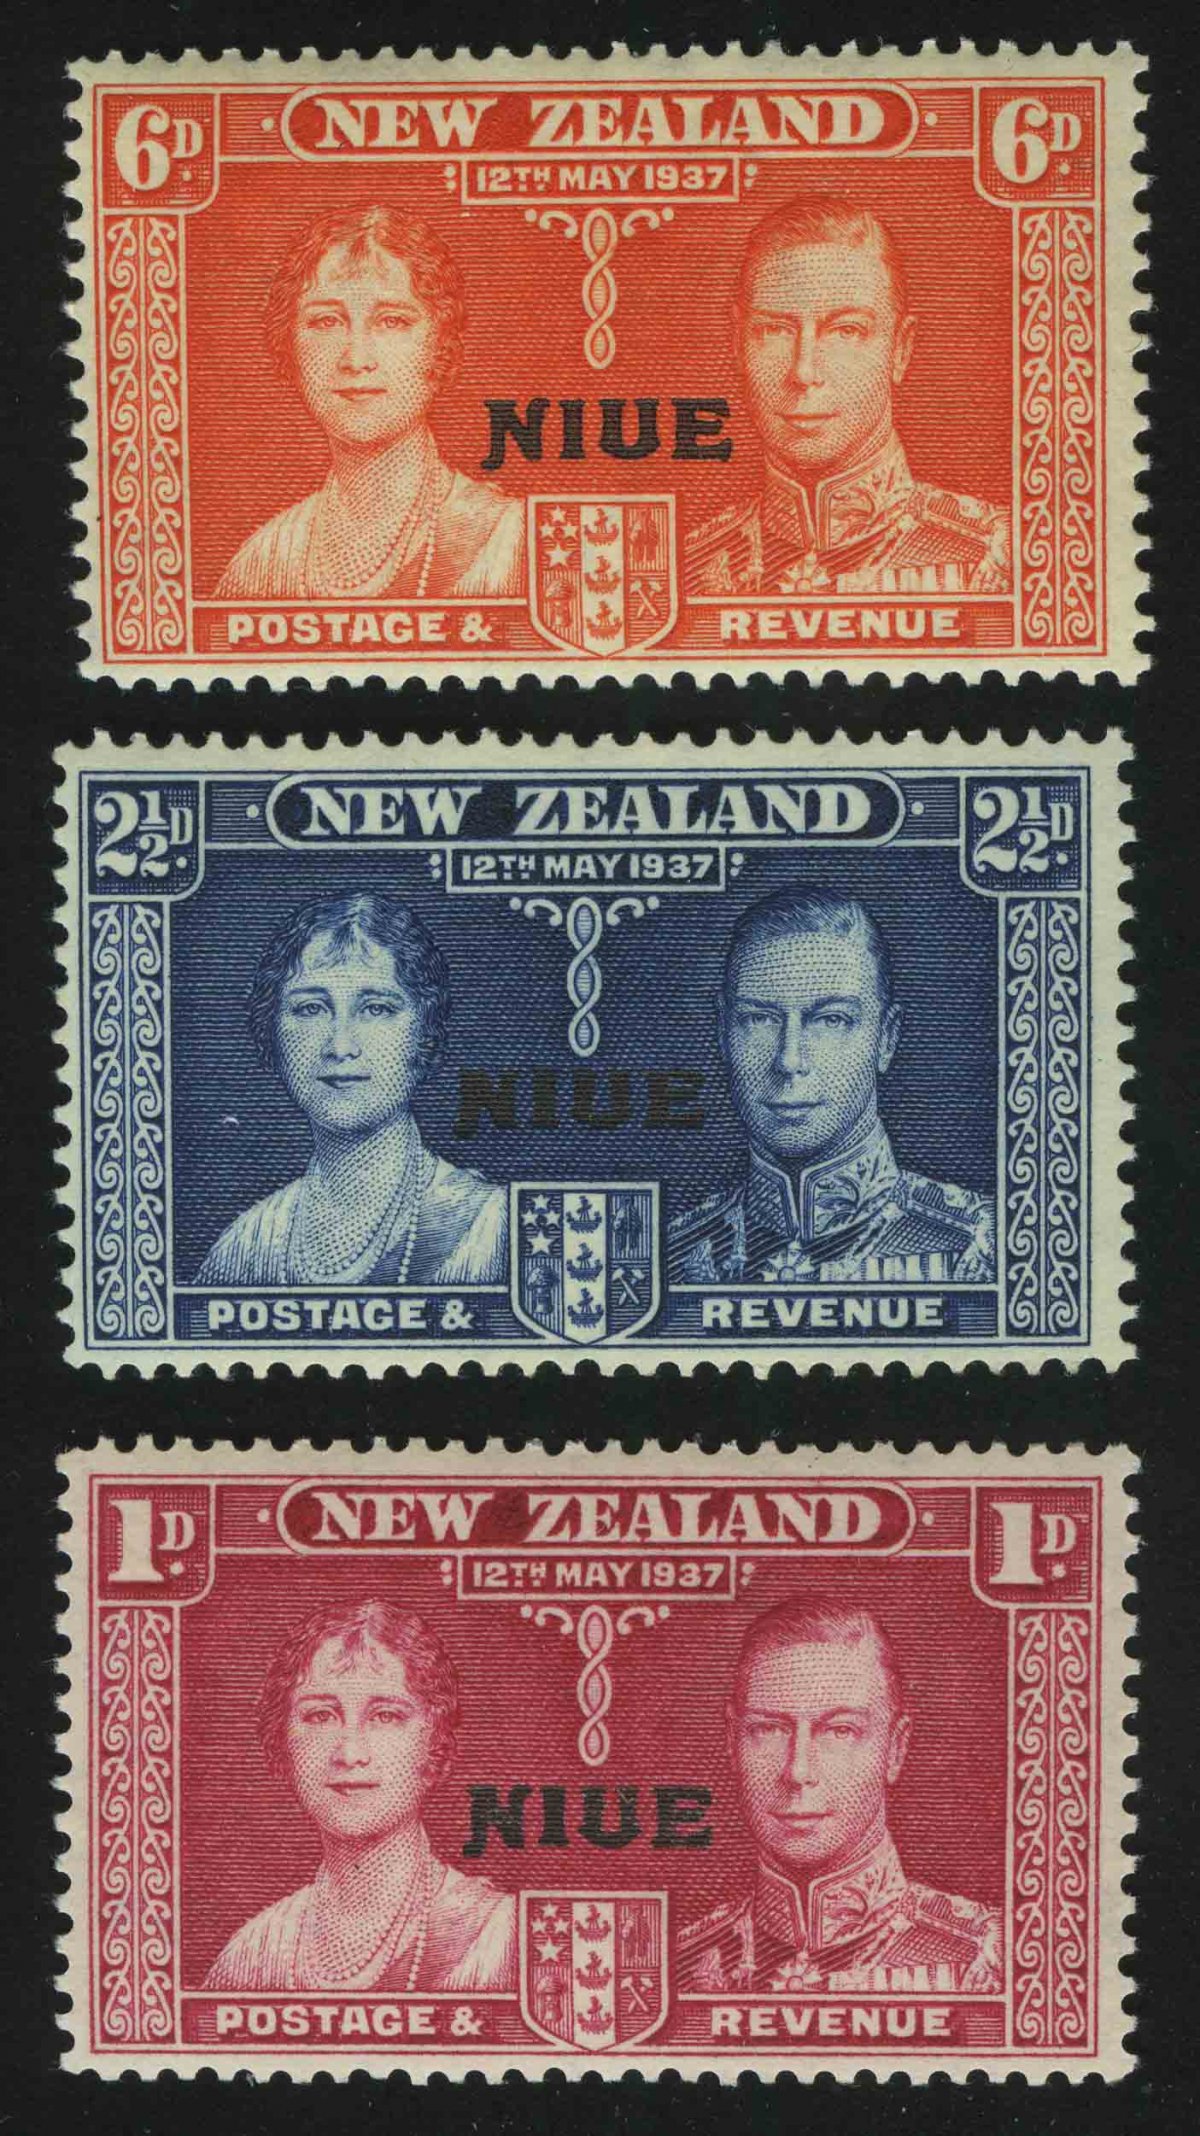 Postage stamps of Niue